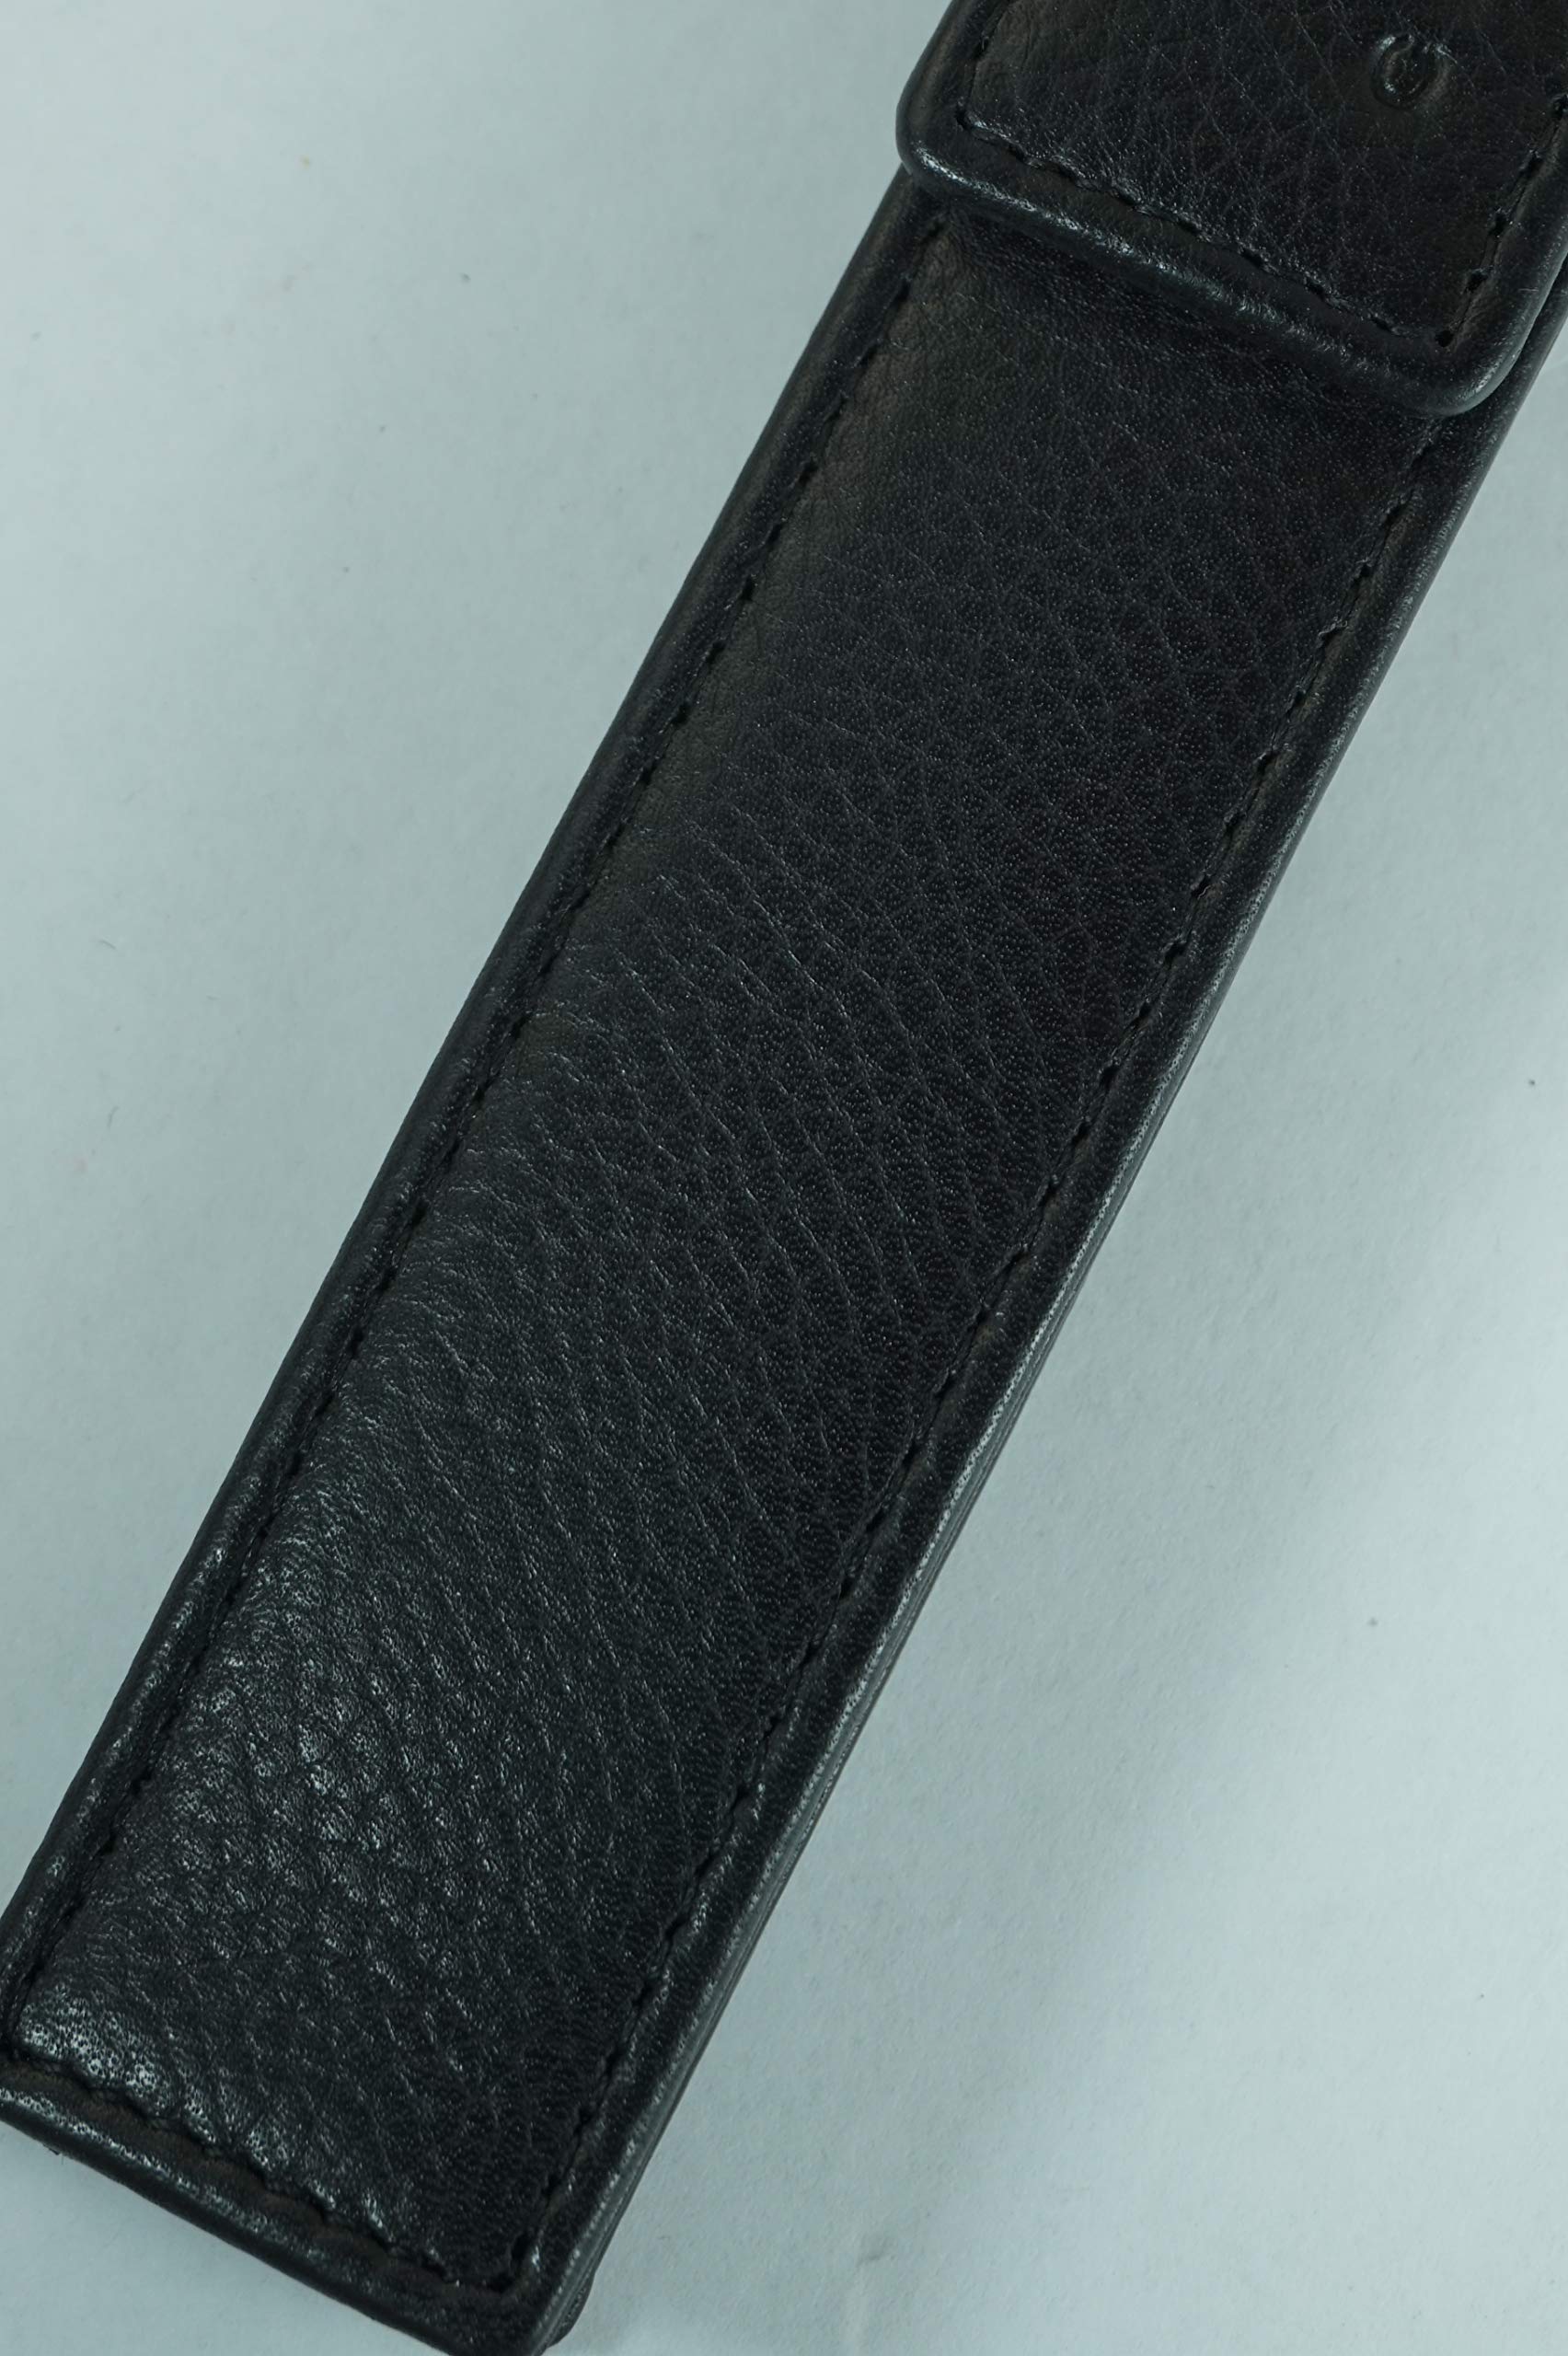 Cross Full Grain Italian Leather, Signature Perforated Detailing, Single Flip Top Pen Pouch with Secure snap, Black and Can Accommodate Any Cross Pen